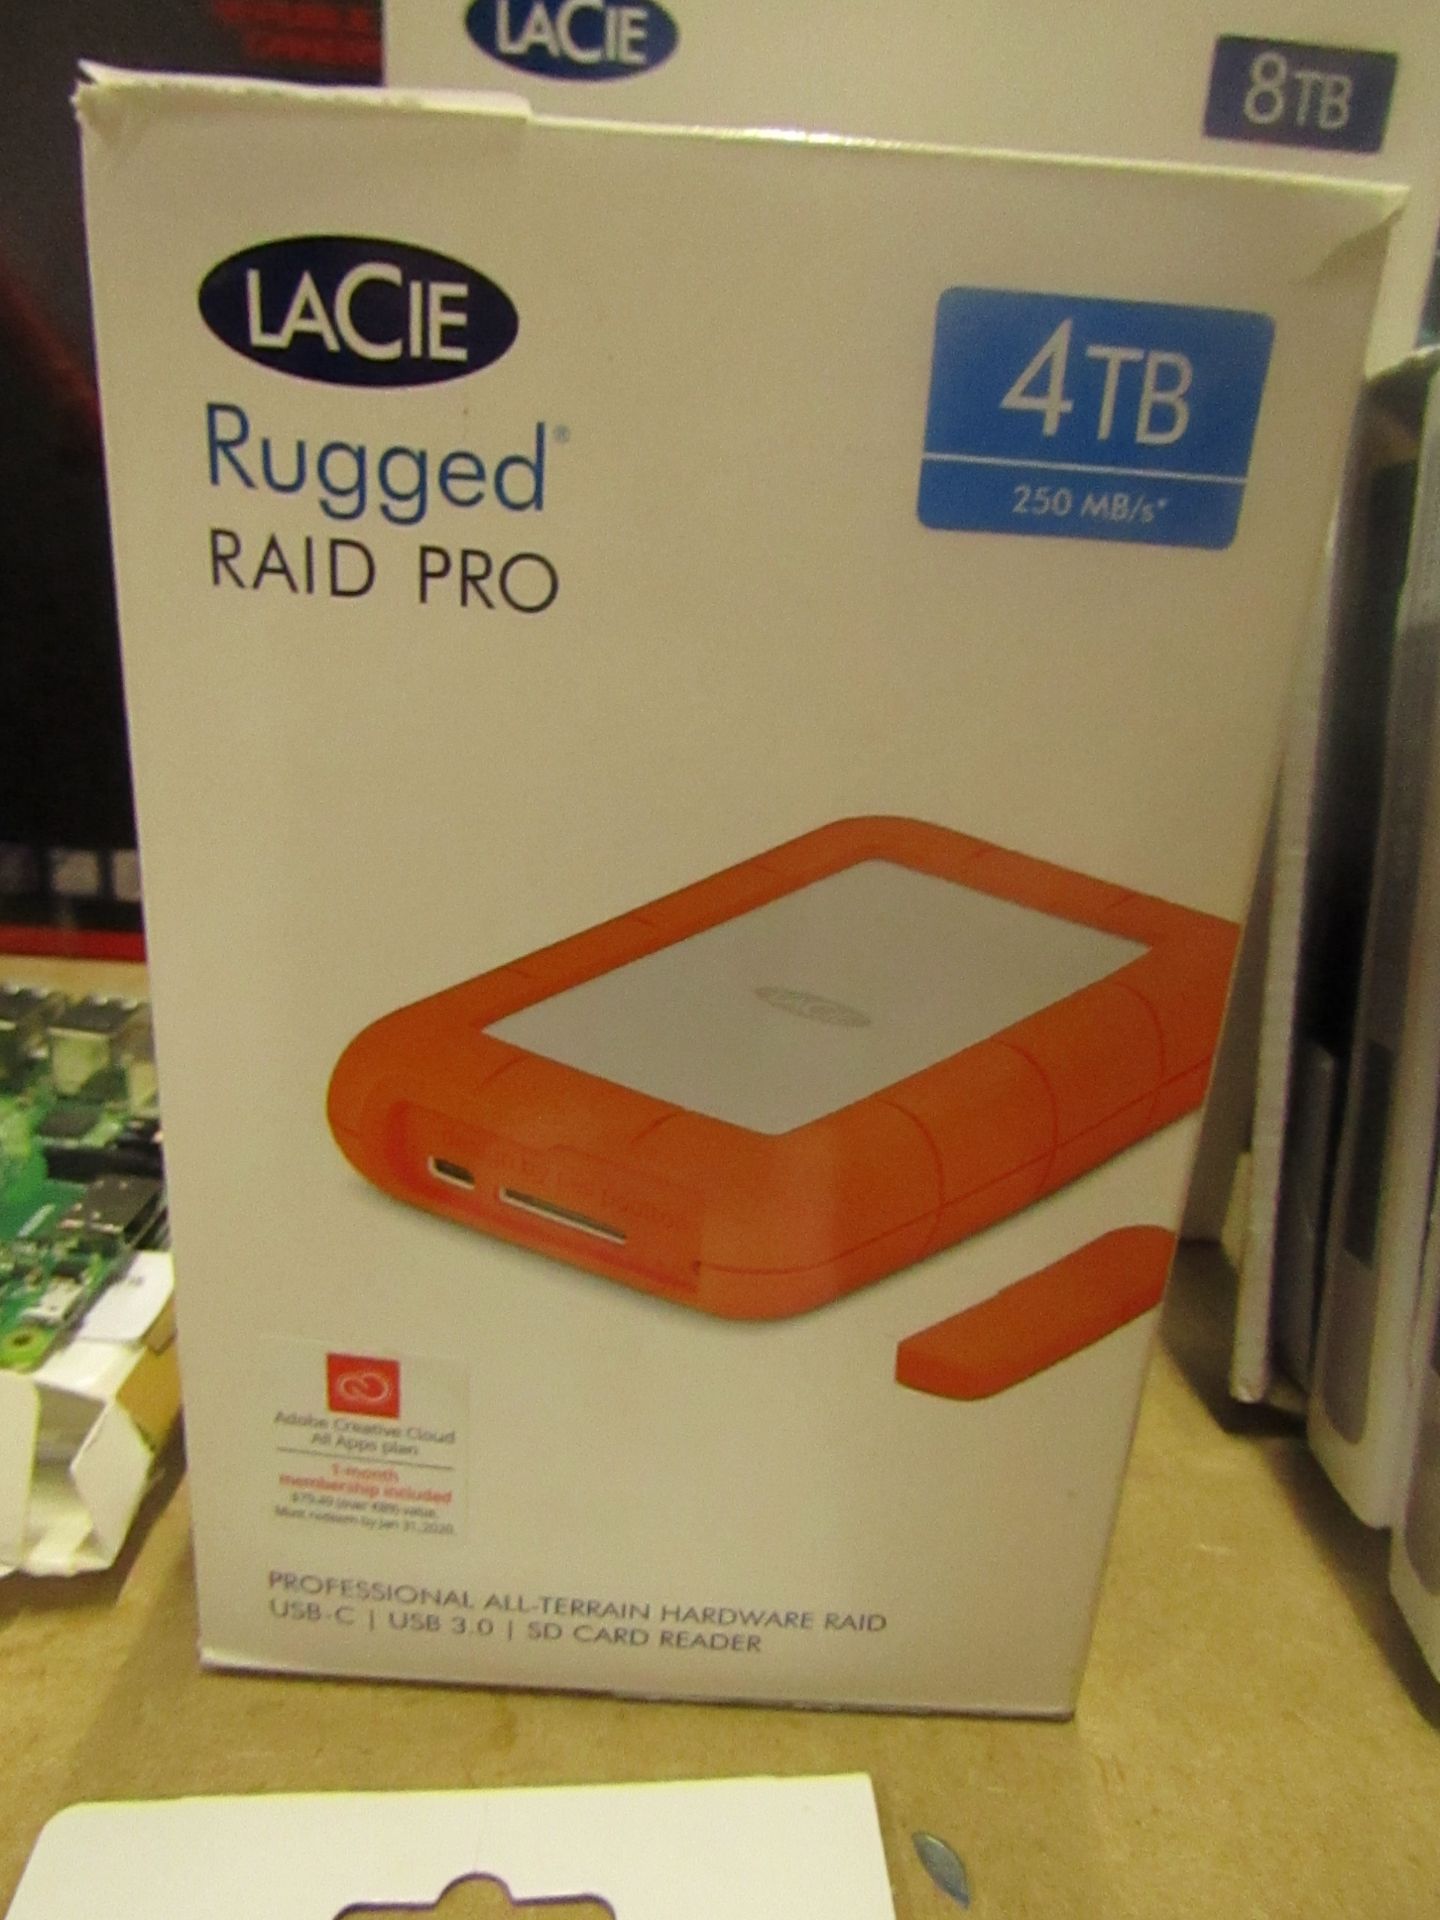 LaCie Rugged raid pro 4TB, untested and boxed. RRP £266.00